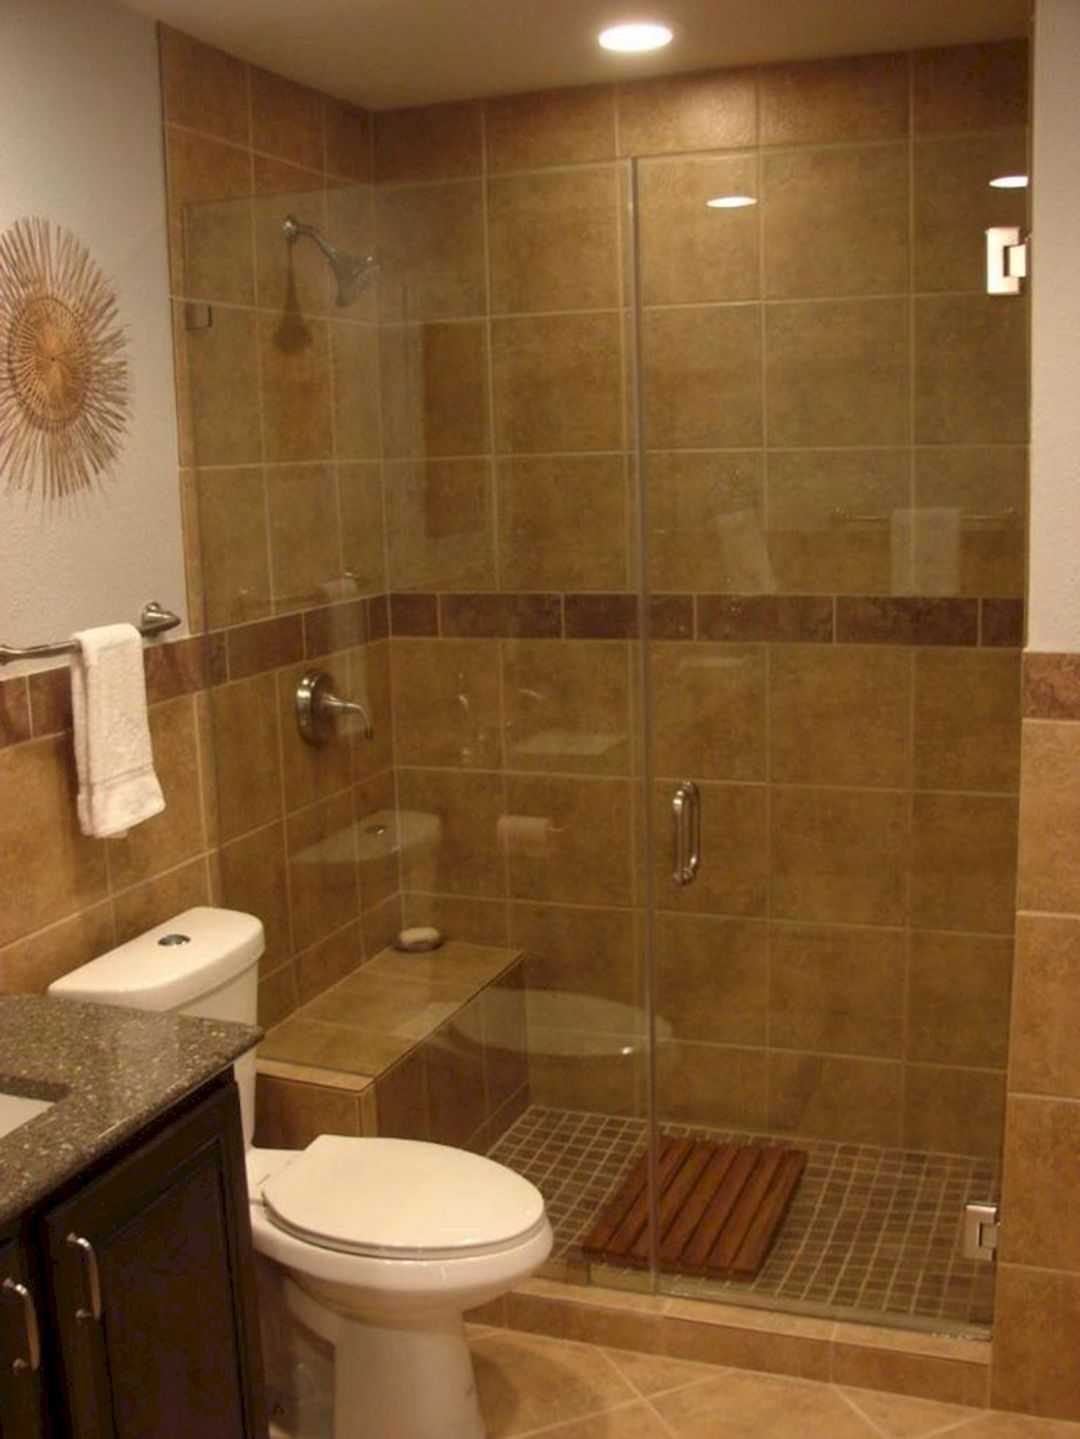 Bathroom Shower Doors Ideas / Frameless Shower Doors and Pros-Cons You Must Know - Amaza ... - Here, neutral glass tiles add subtle shimmer behind the glass doors of a frameless enclosure.